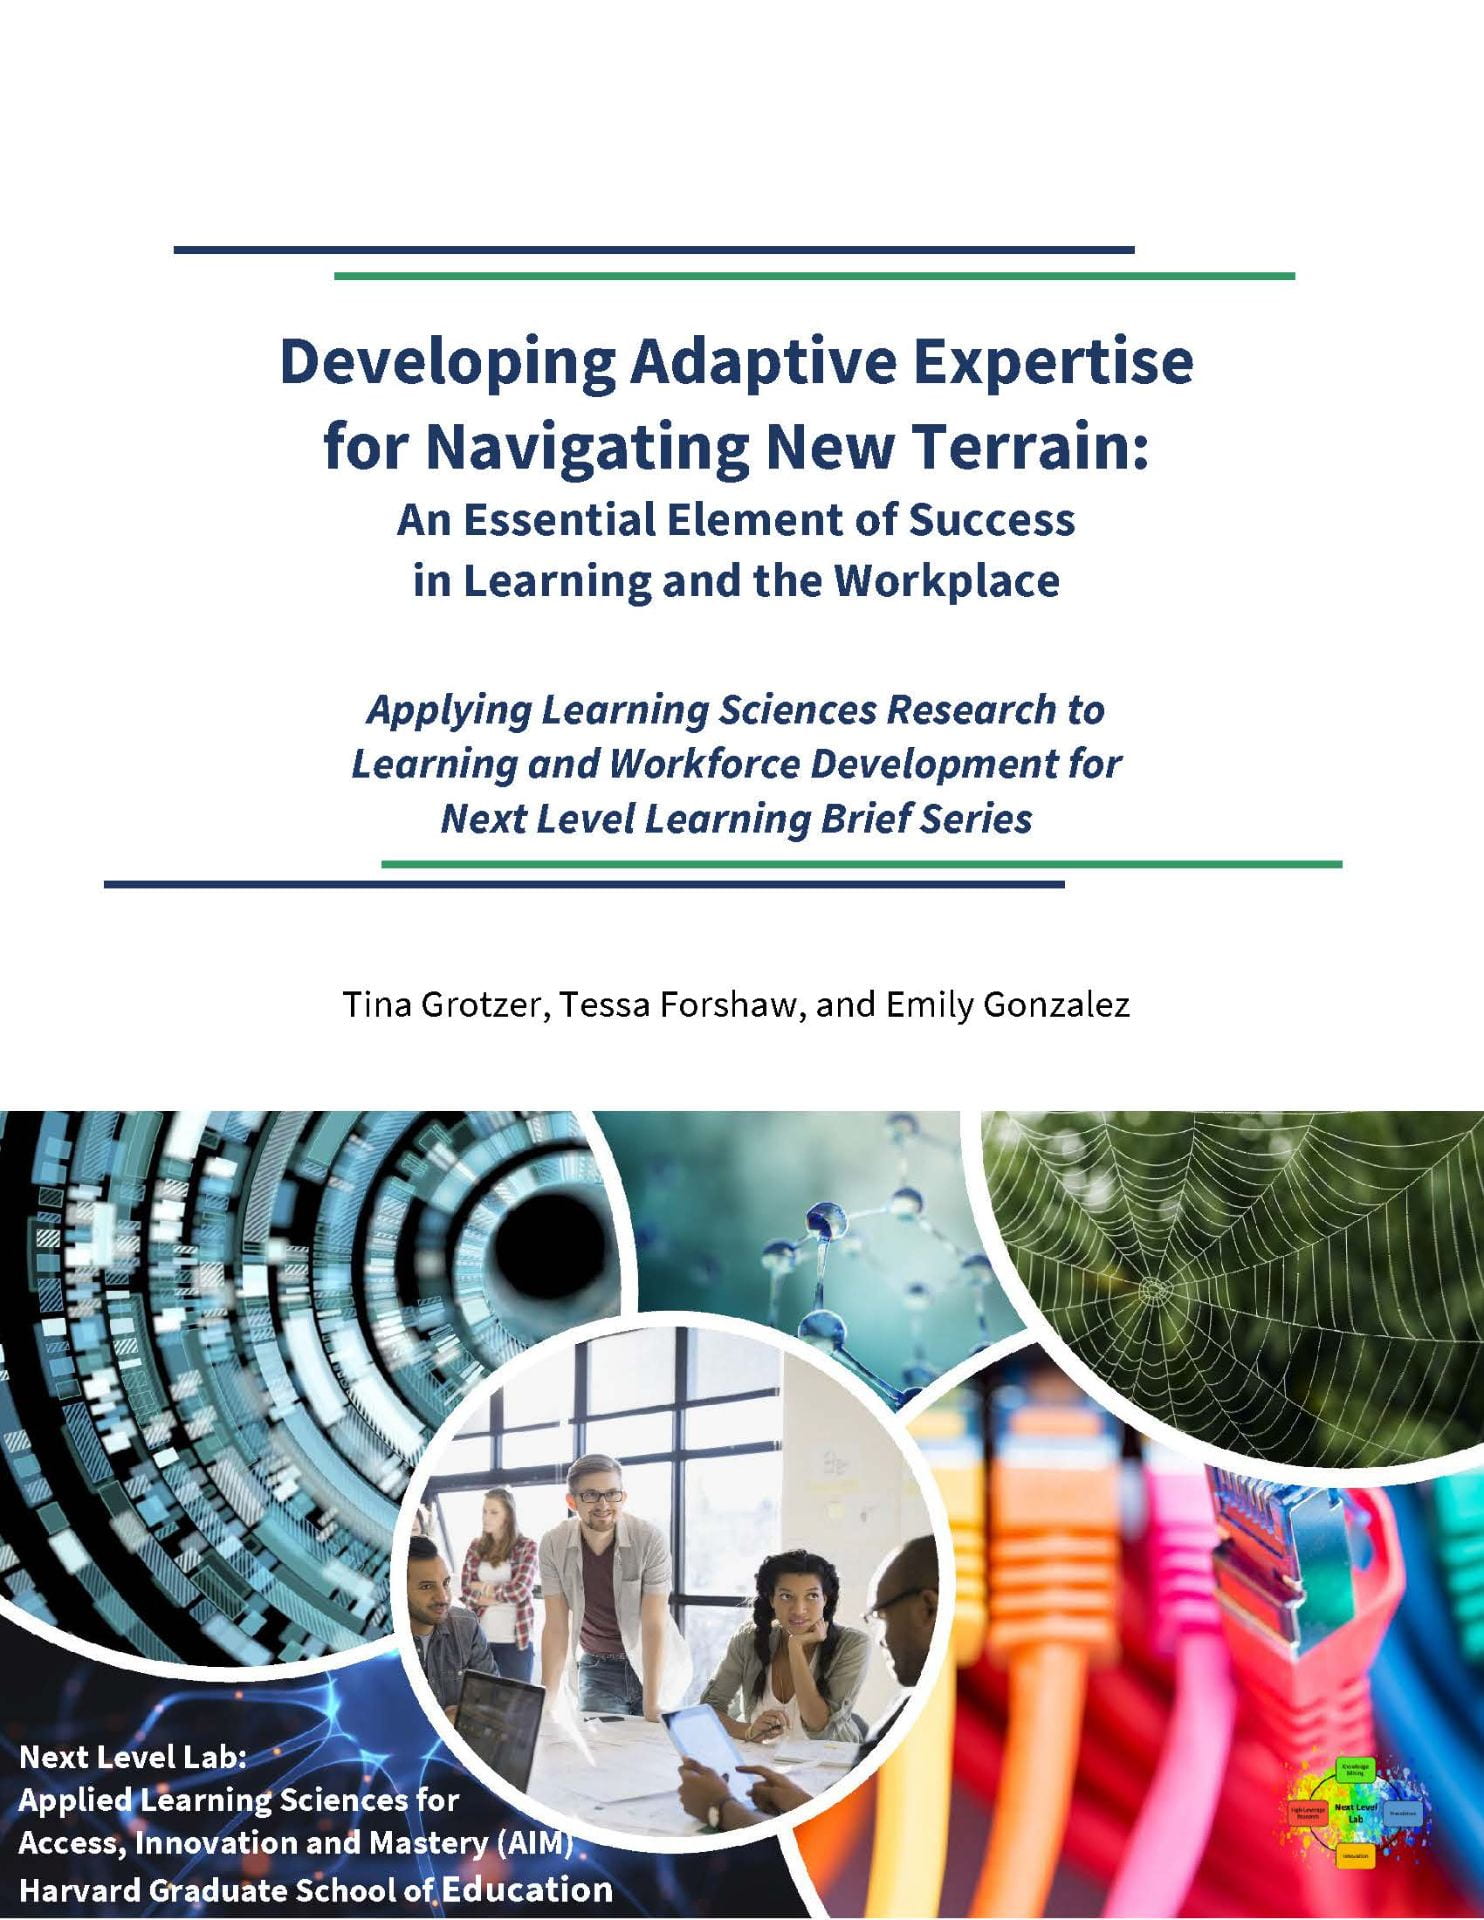 Developing Adaptive Expertise for Navigating New Terrain: An Essential Element of Success in Learning and the Workplace